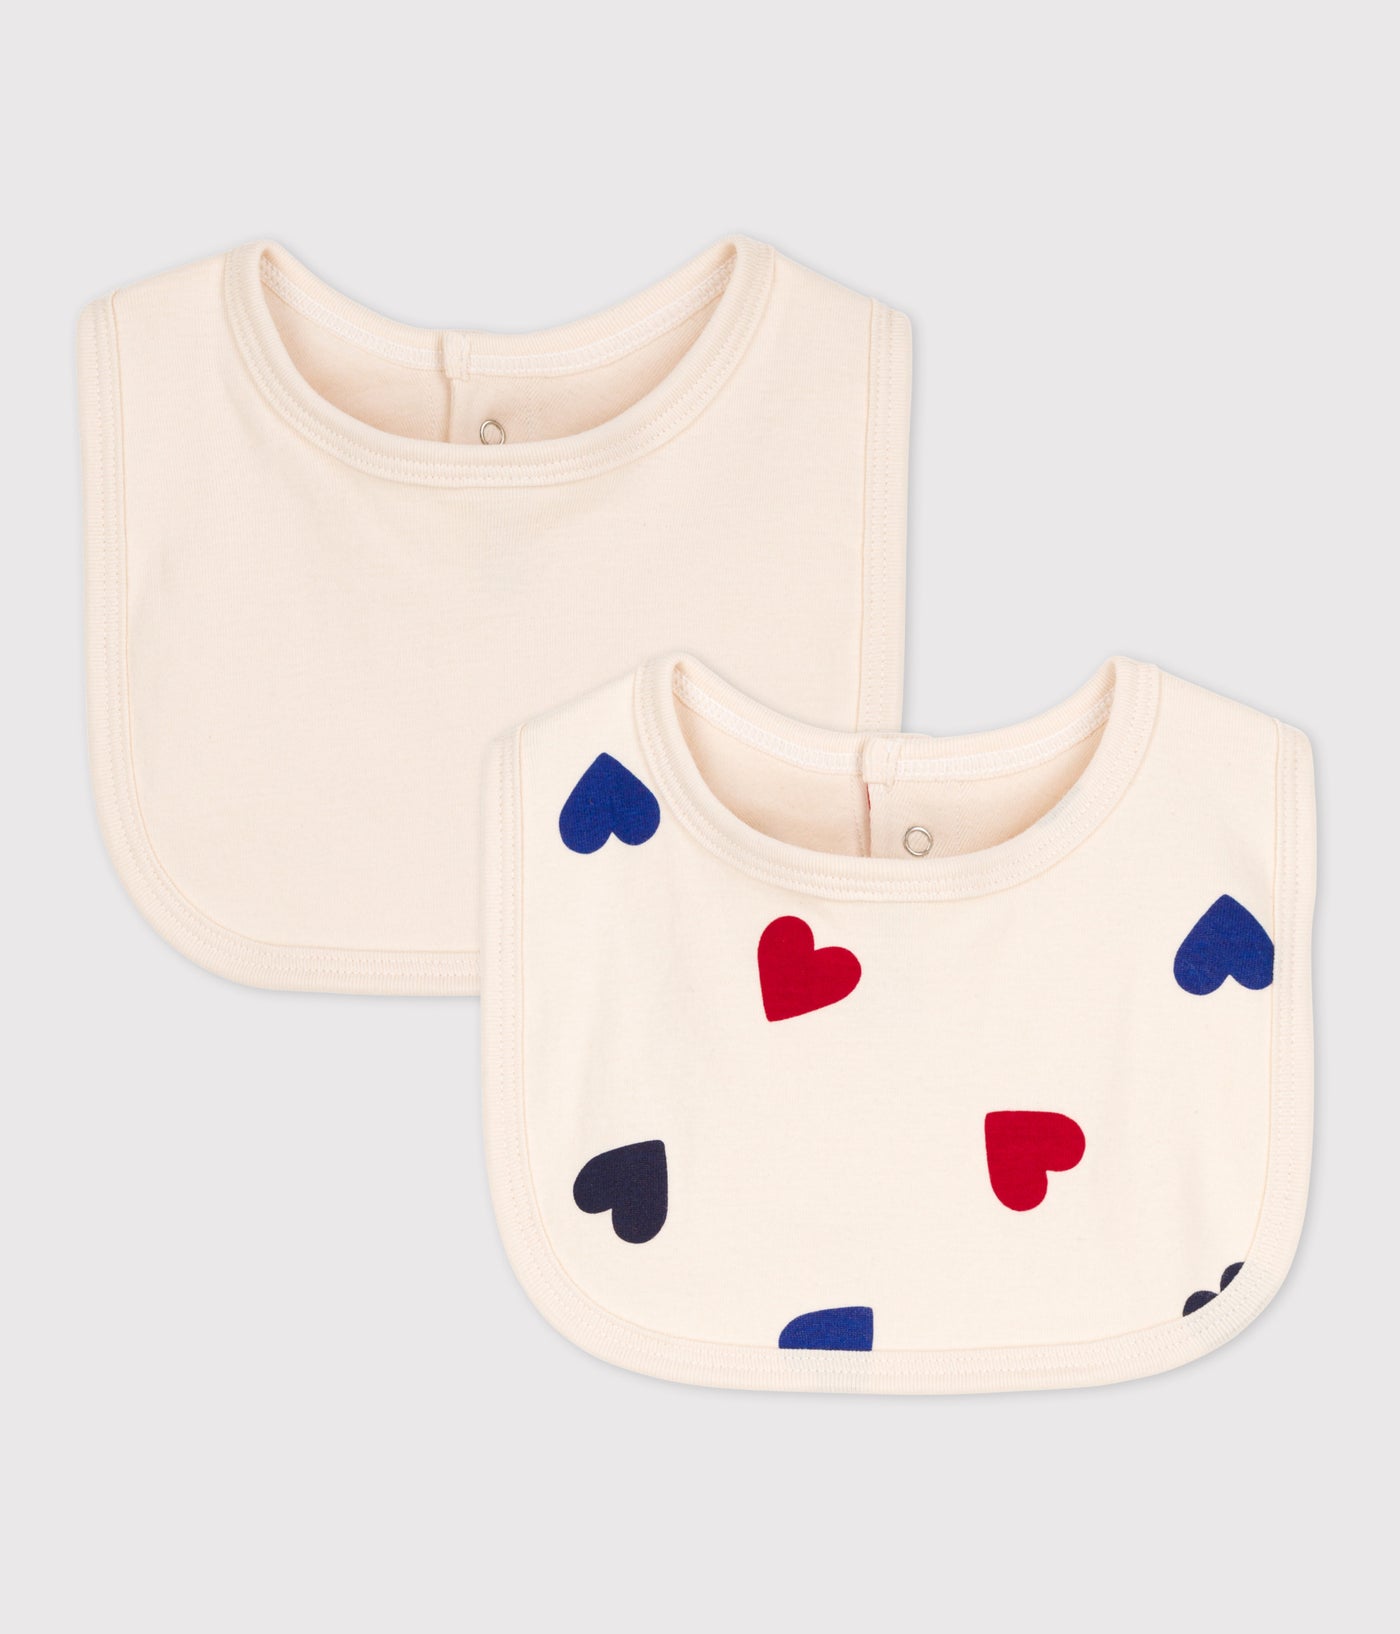 HEART PATTERNED COTTON BABY BIBS - 2-PACK